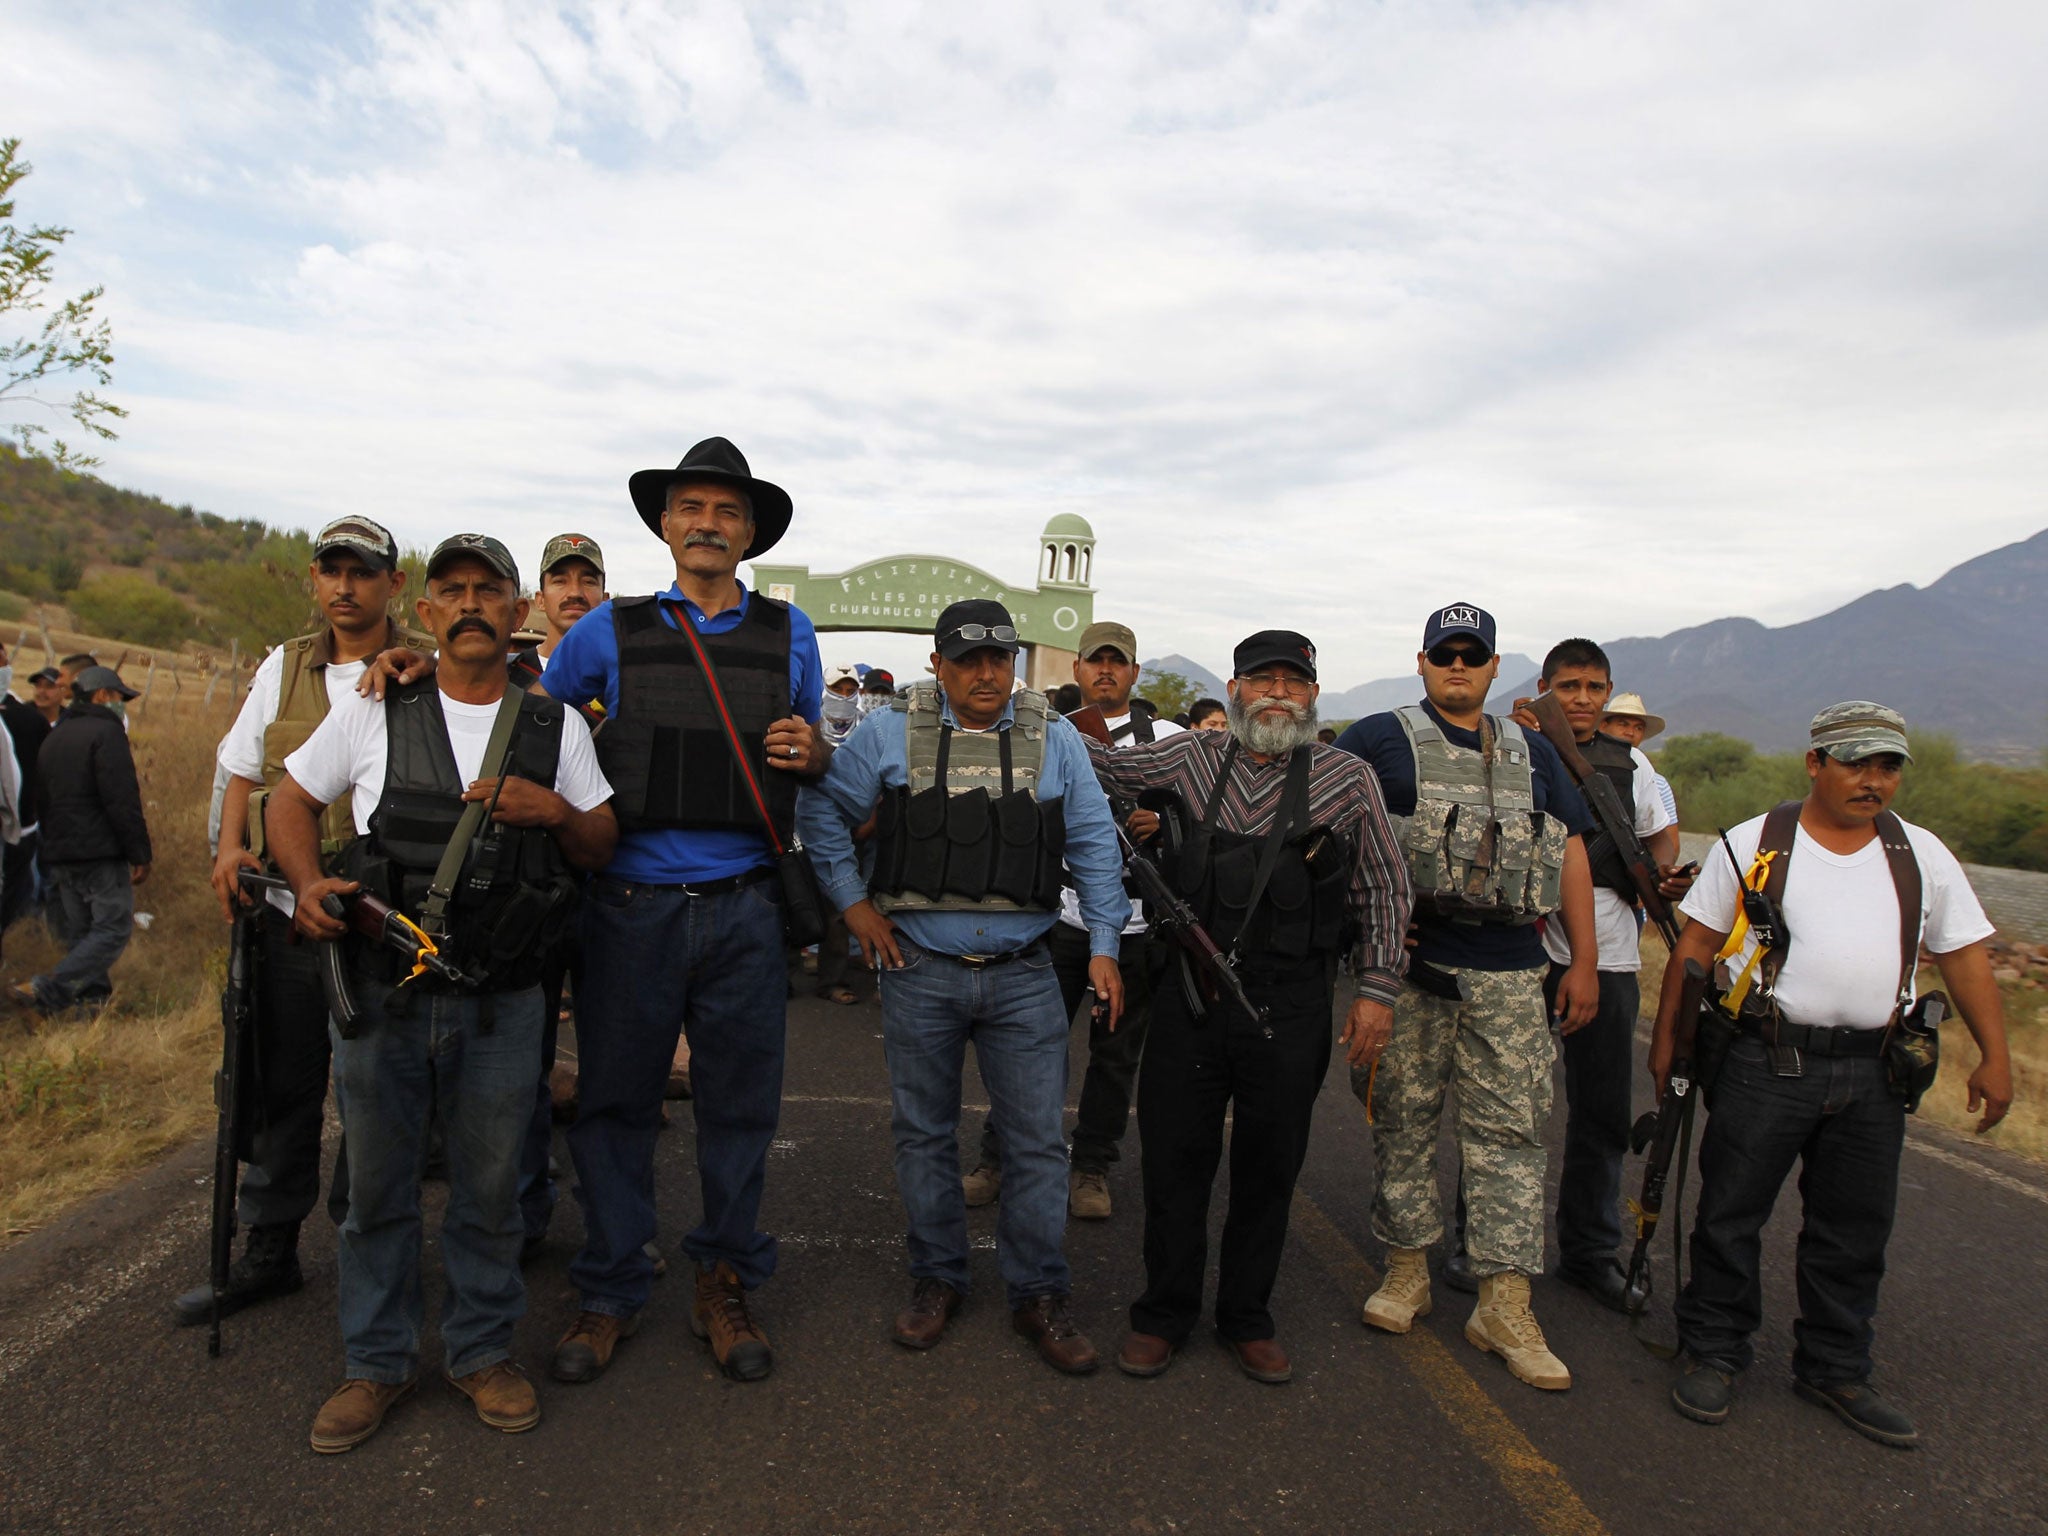 Dr Jose Manuel Mireles (third left), one of the leaders of the Michoacan vigilante group pictured with him. He has since been injured in an aircrash that could have been an attempt on his life